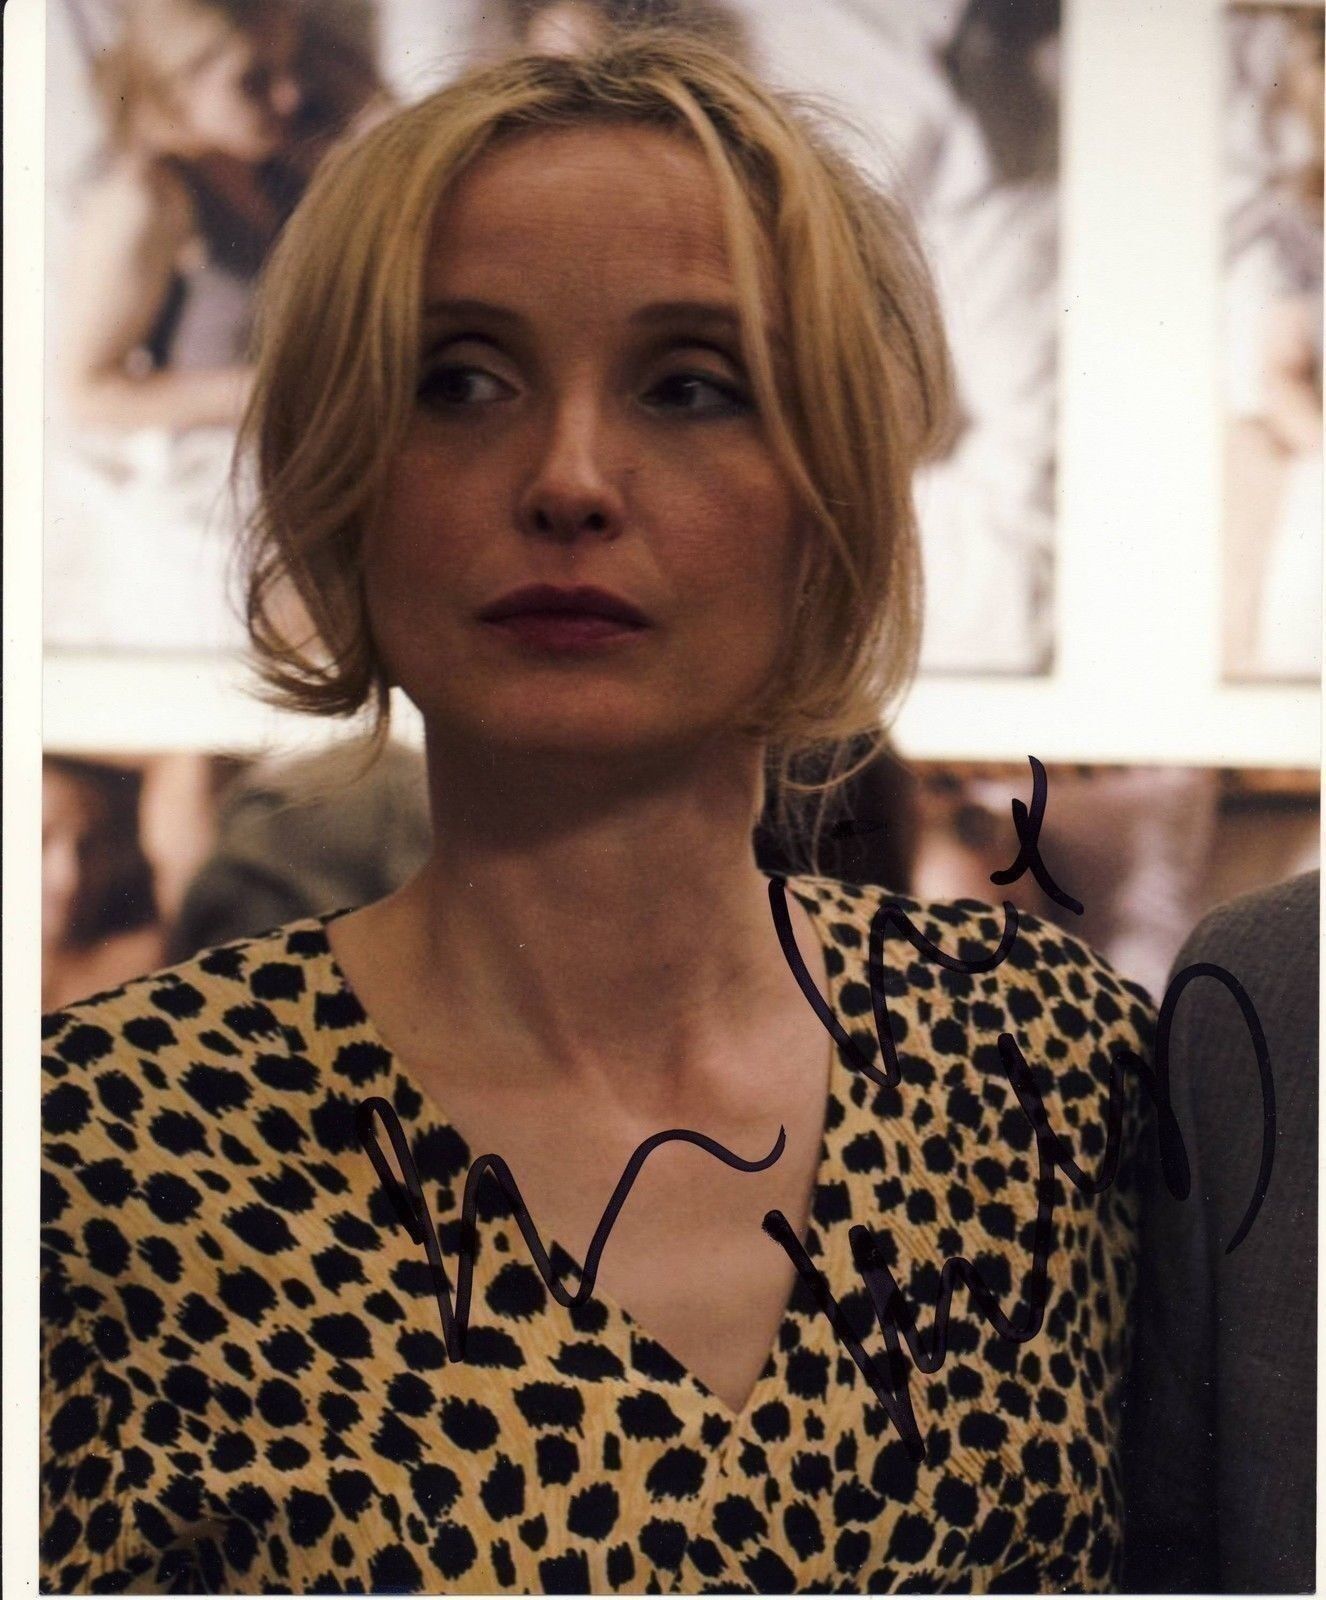 Julie Delpy Autograph 2 DAYS in NEW YORK Signed 10x8 Photo Poster painting AFTAL [3528]